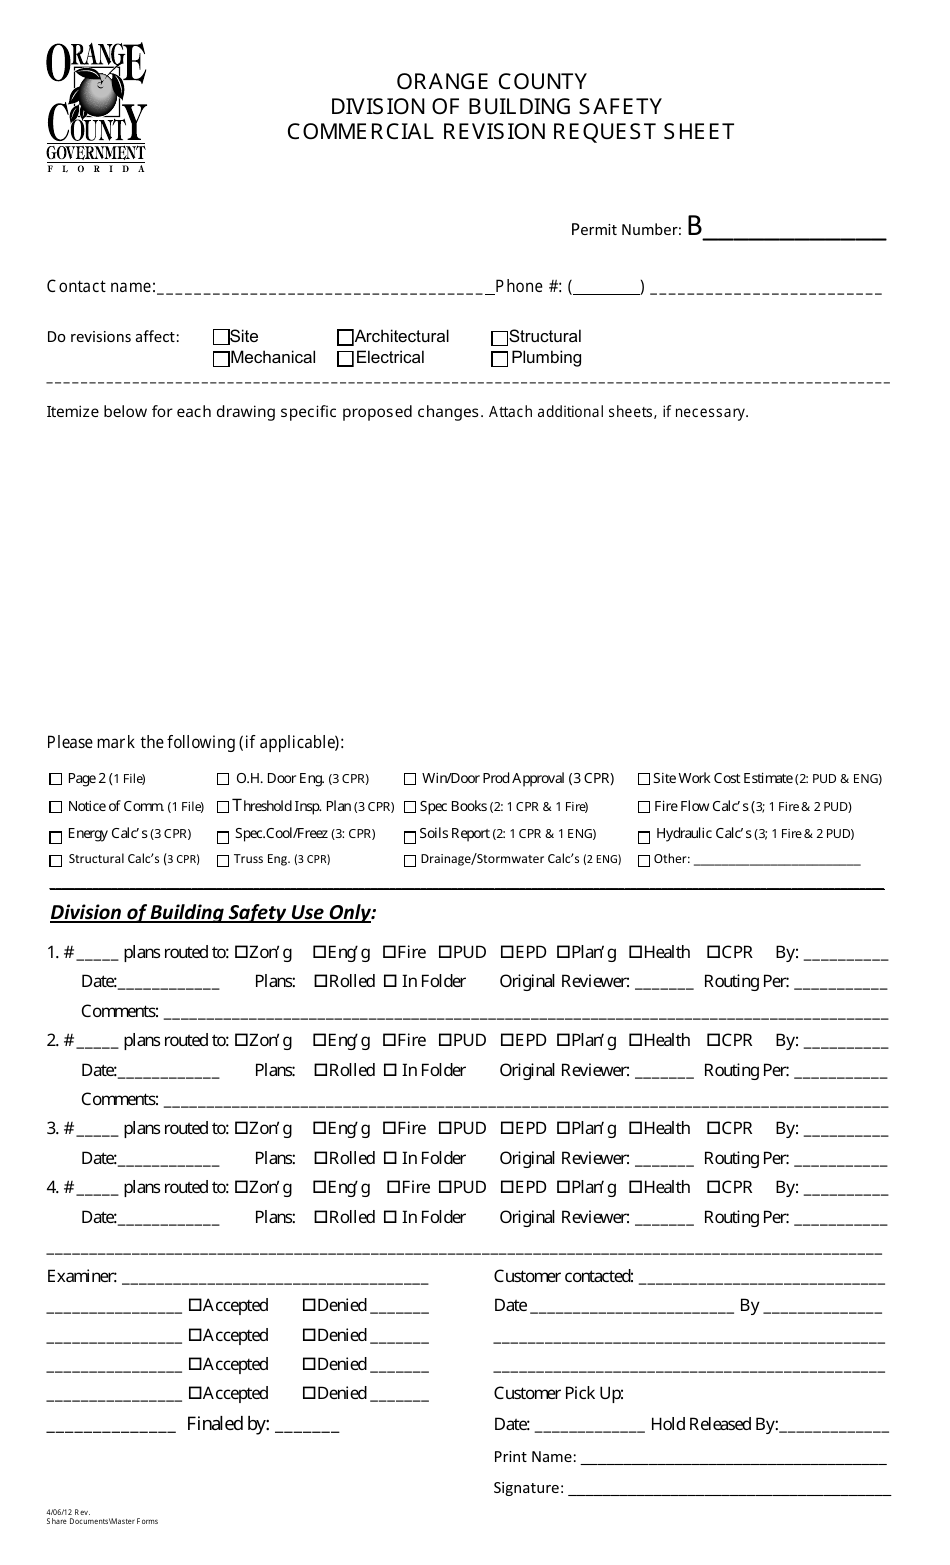 Commercial Revision Request Sheet - Orange County, Florida, Page 1